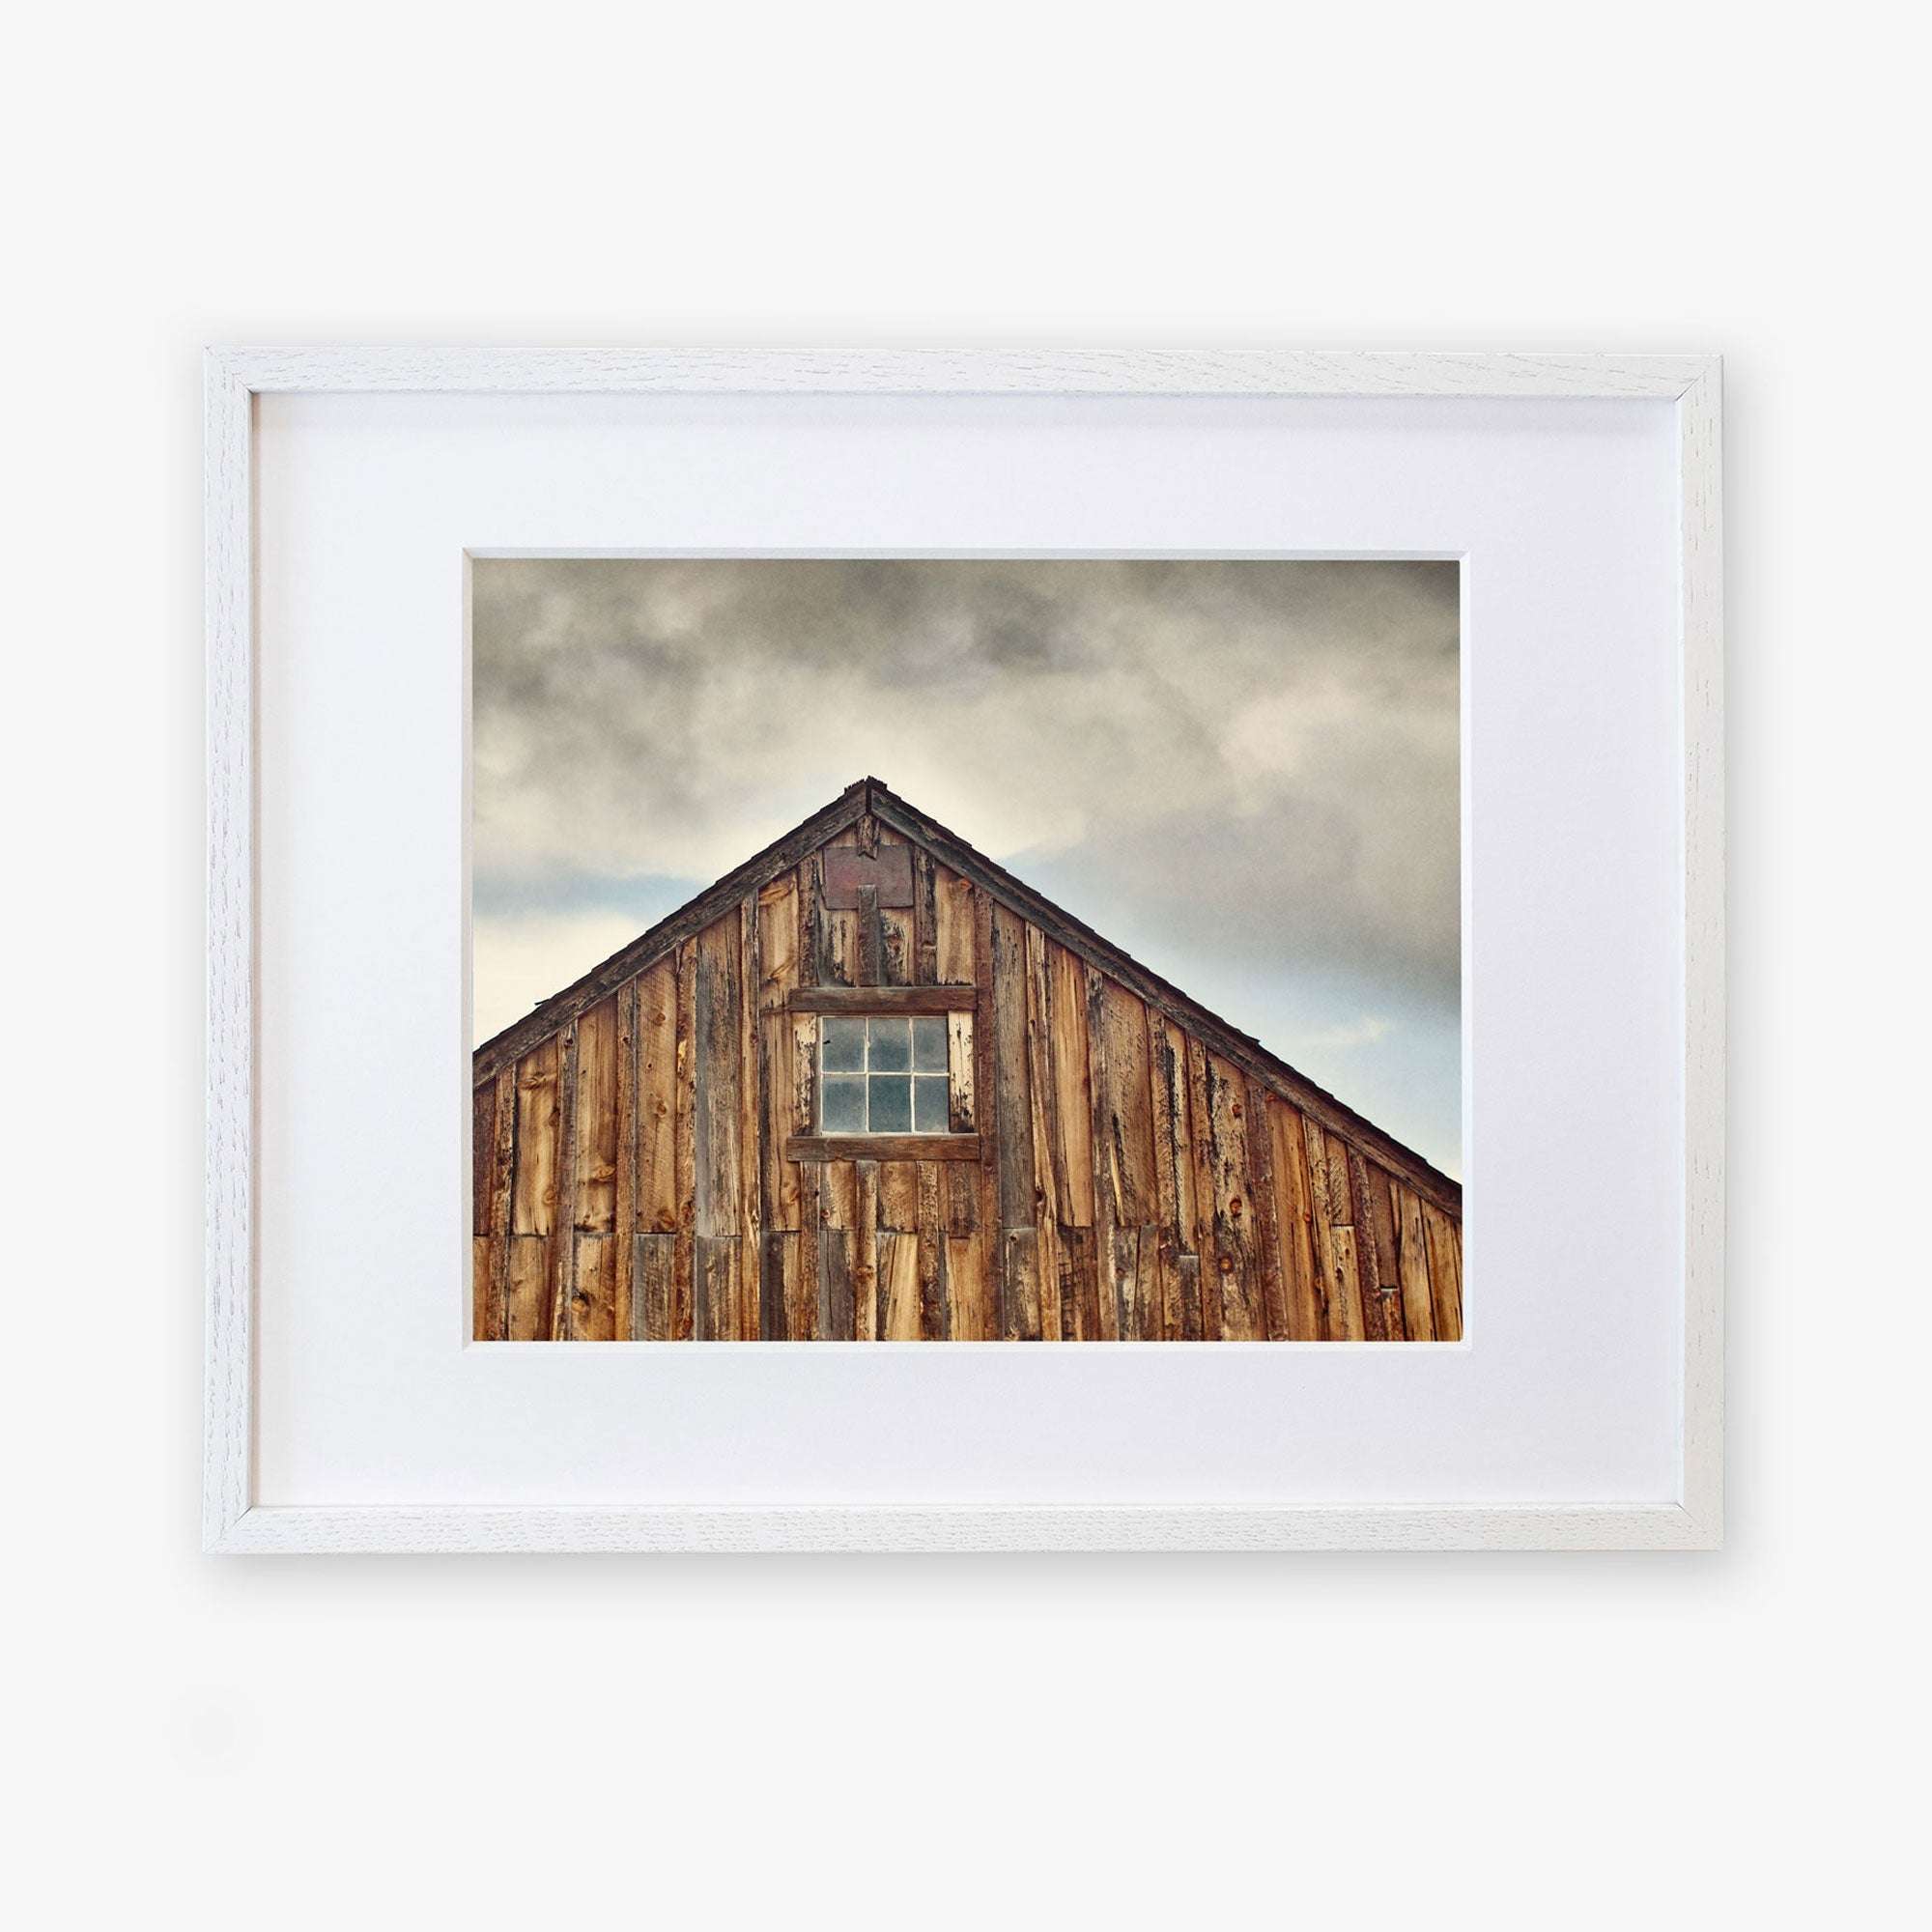 A framed photograph of an Offley Green &#39;Old Barn at Bodie&#39; farmhouse rustic print, displayed against a white background. The barn has weathered planks and a single small window.